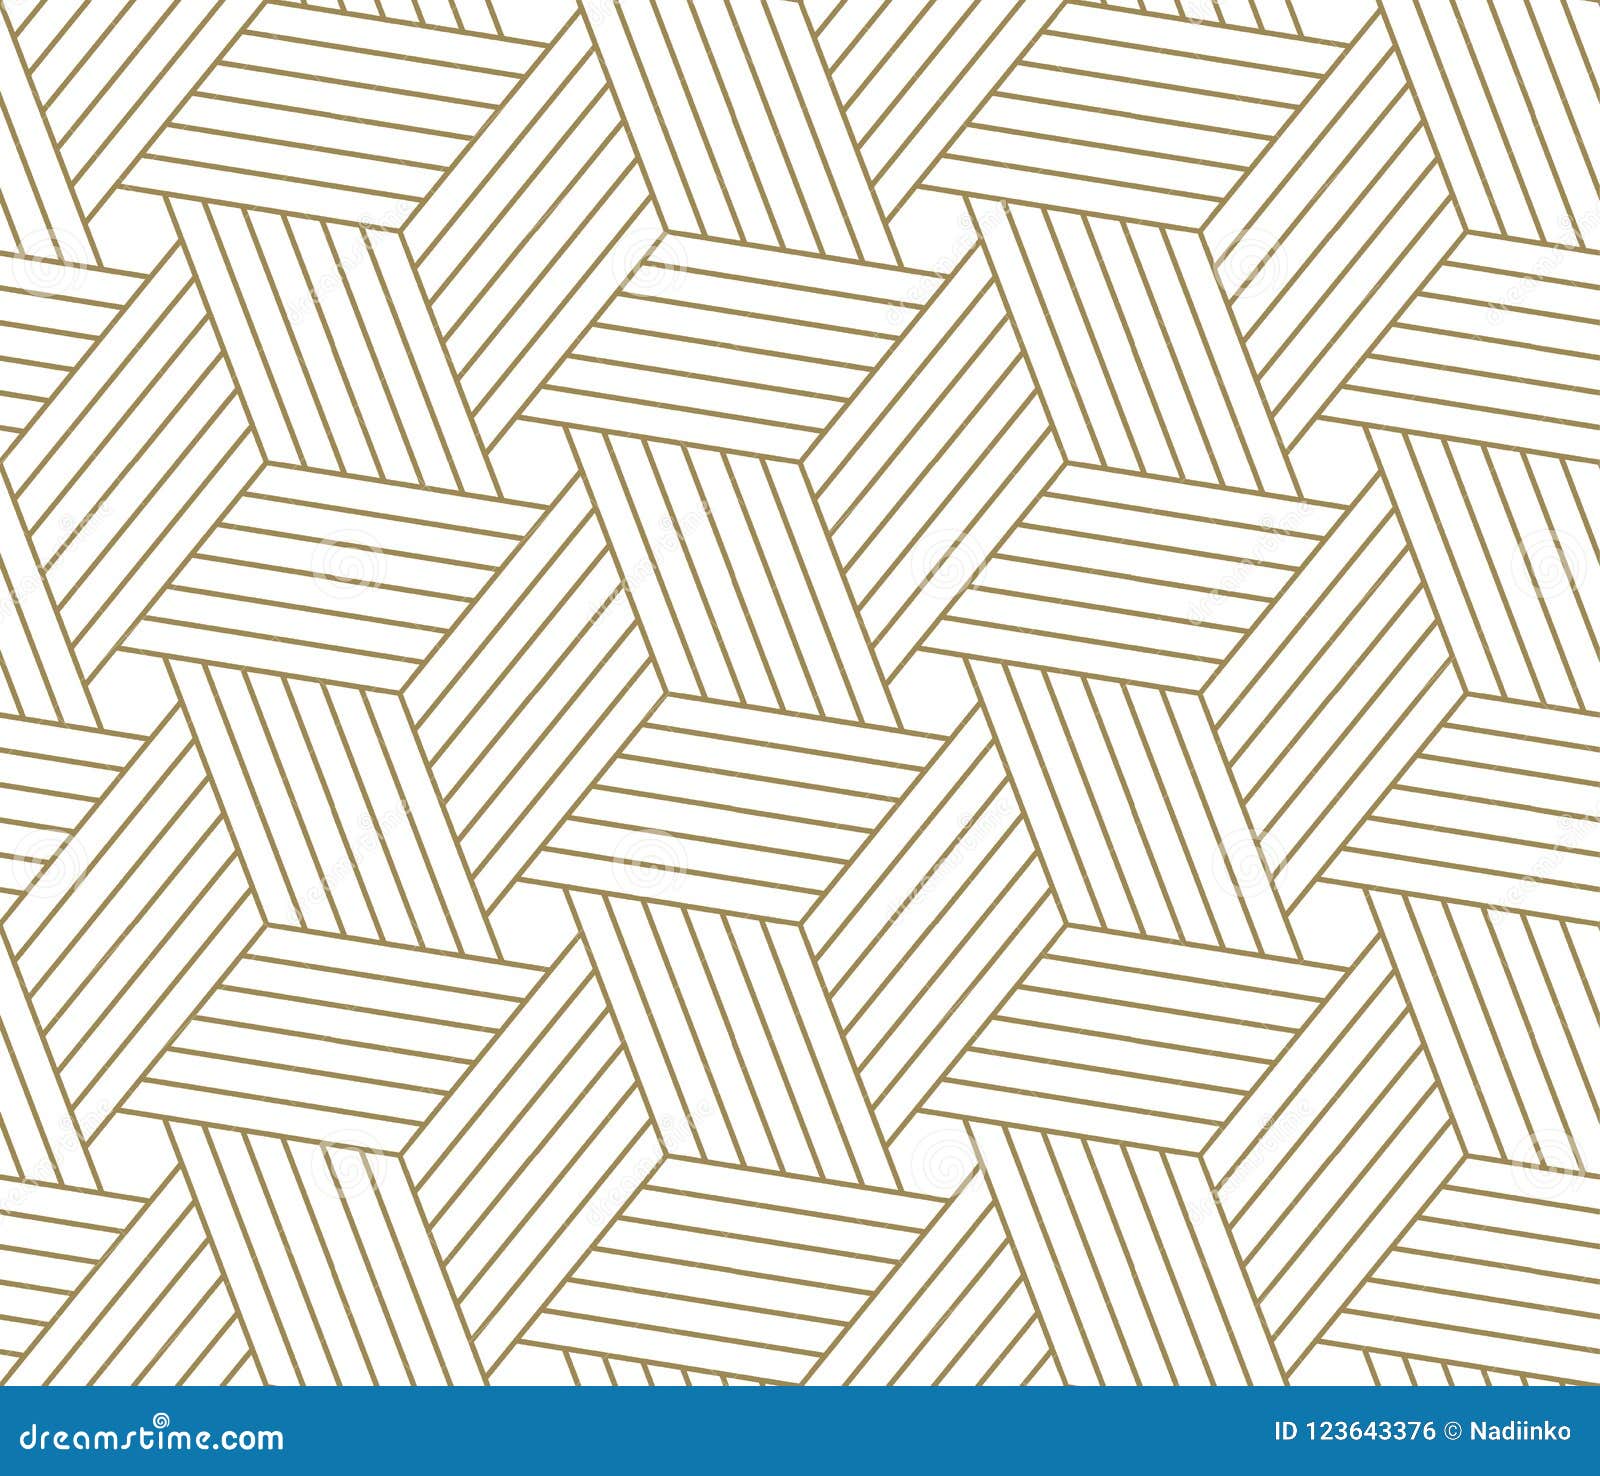 modern simple geometric  seamless pattern with gold line texture on white background. light abstract wallpaper